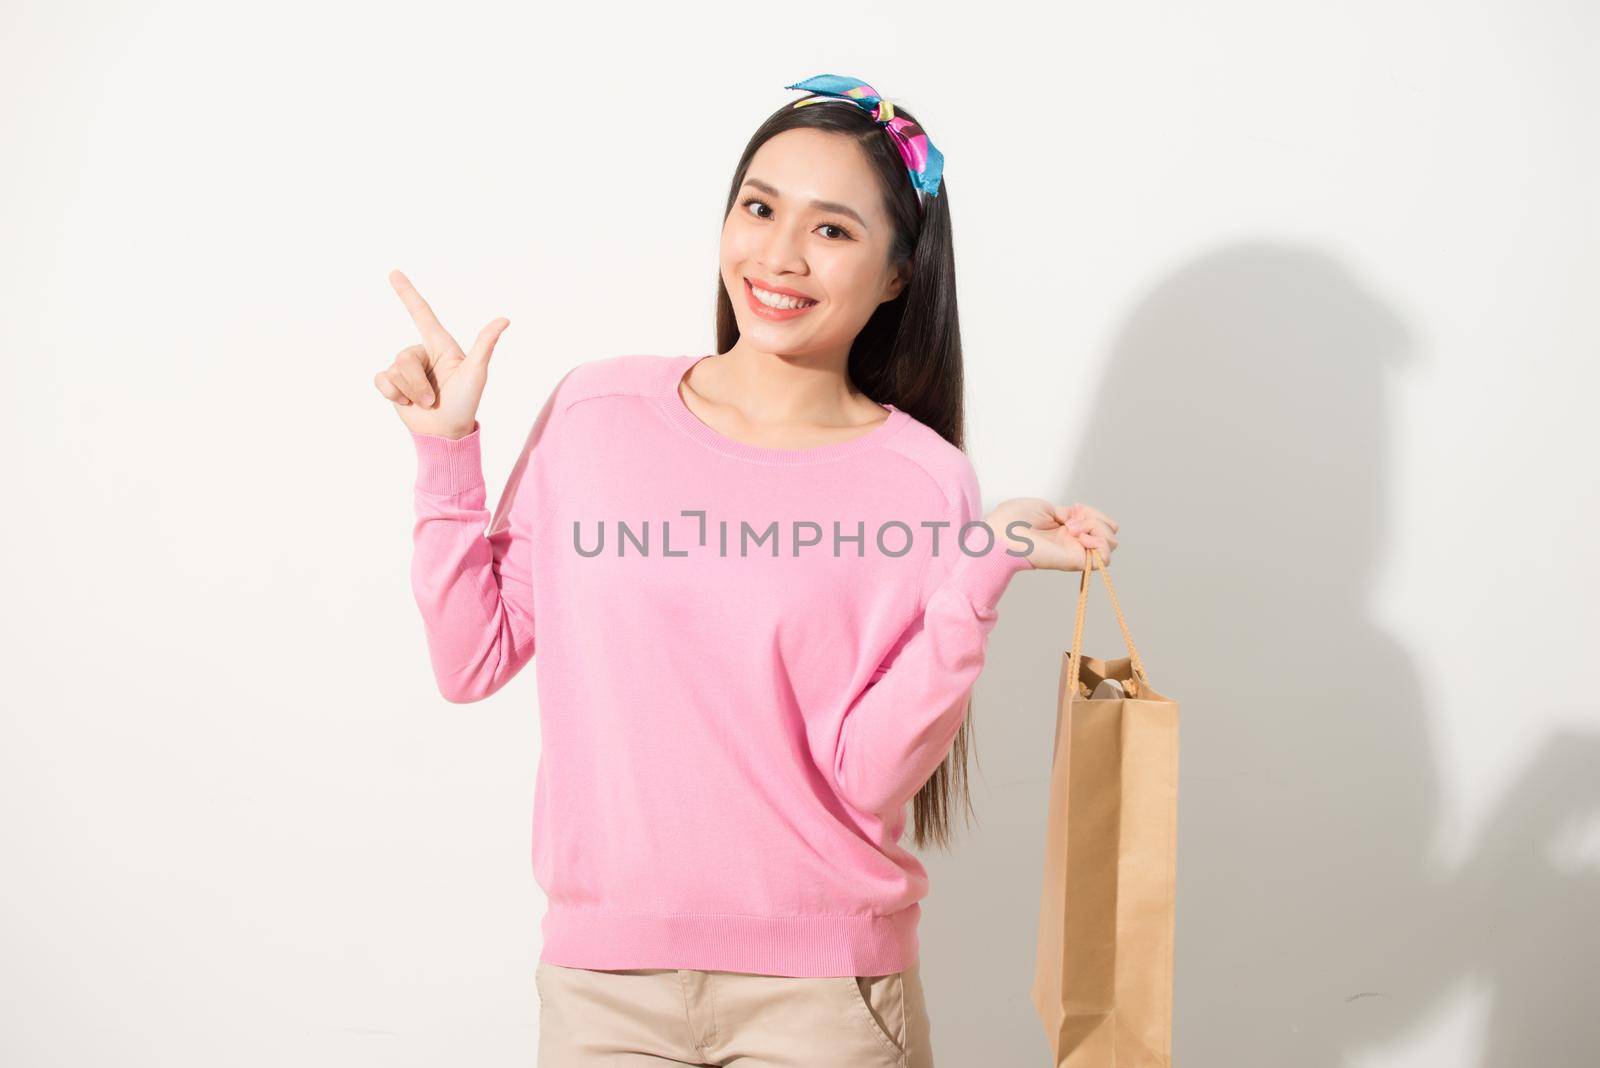 Cheerful young pretty woman raising shopping bags, dancing and looking at camera. Consumerism concept. Isolated front view on white background.